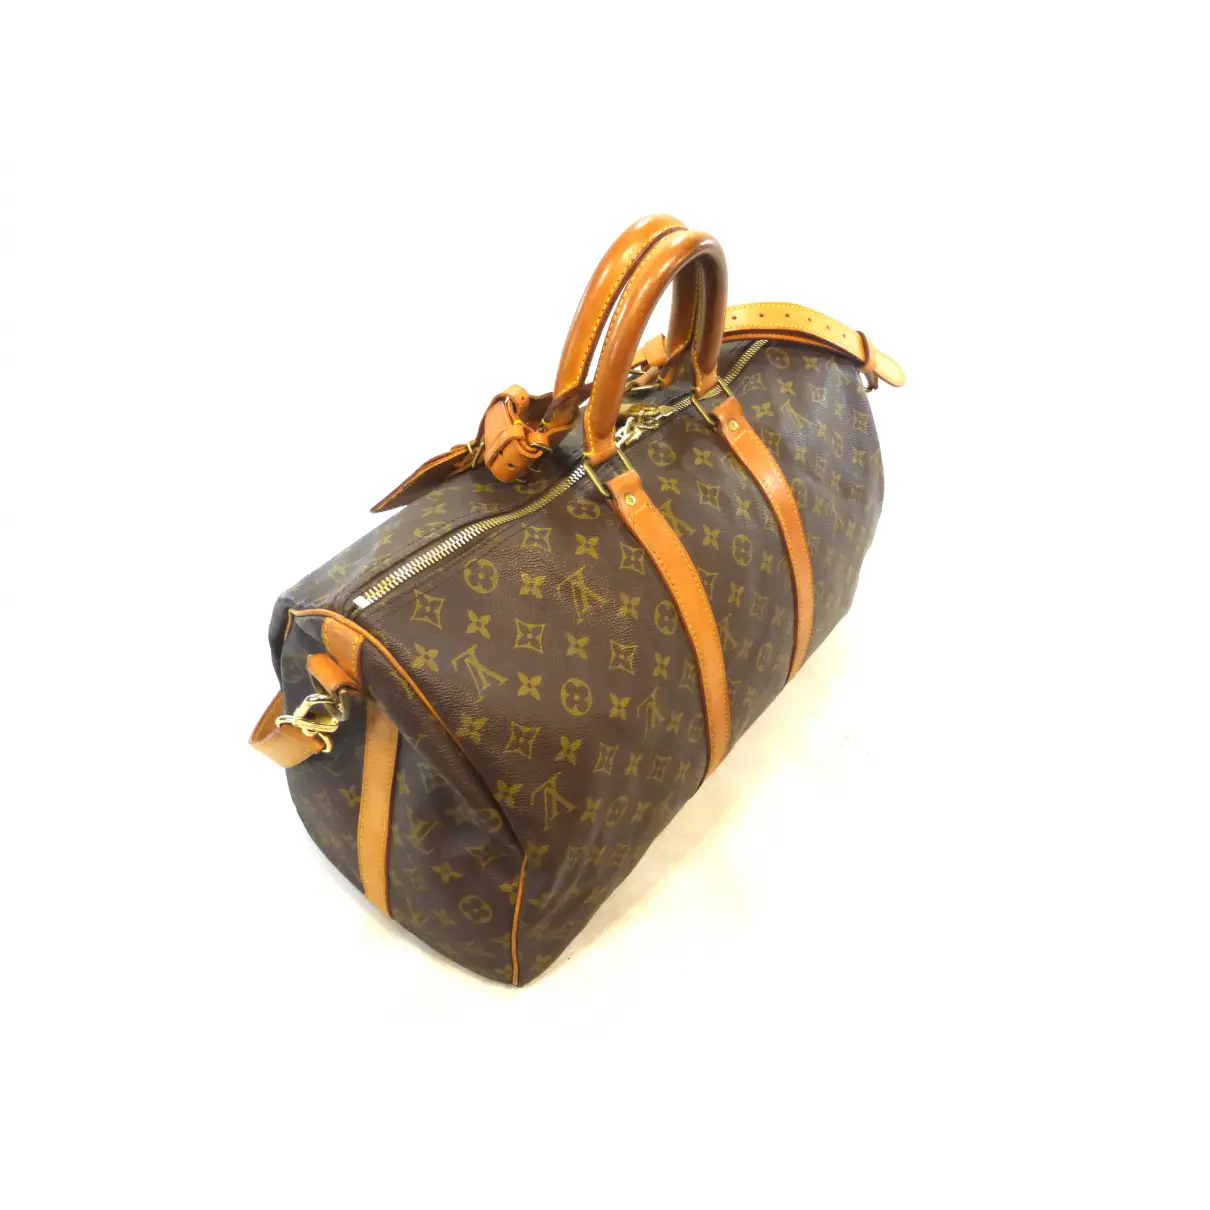 Buy Louis Vuitton Keepall leather travel bag online